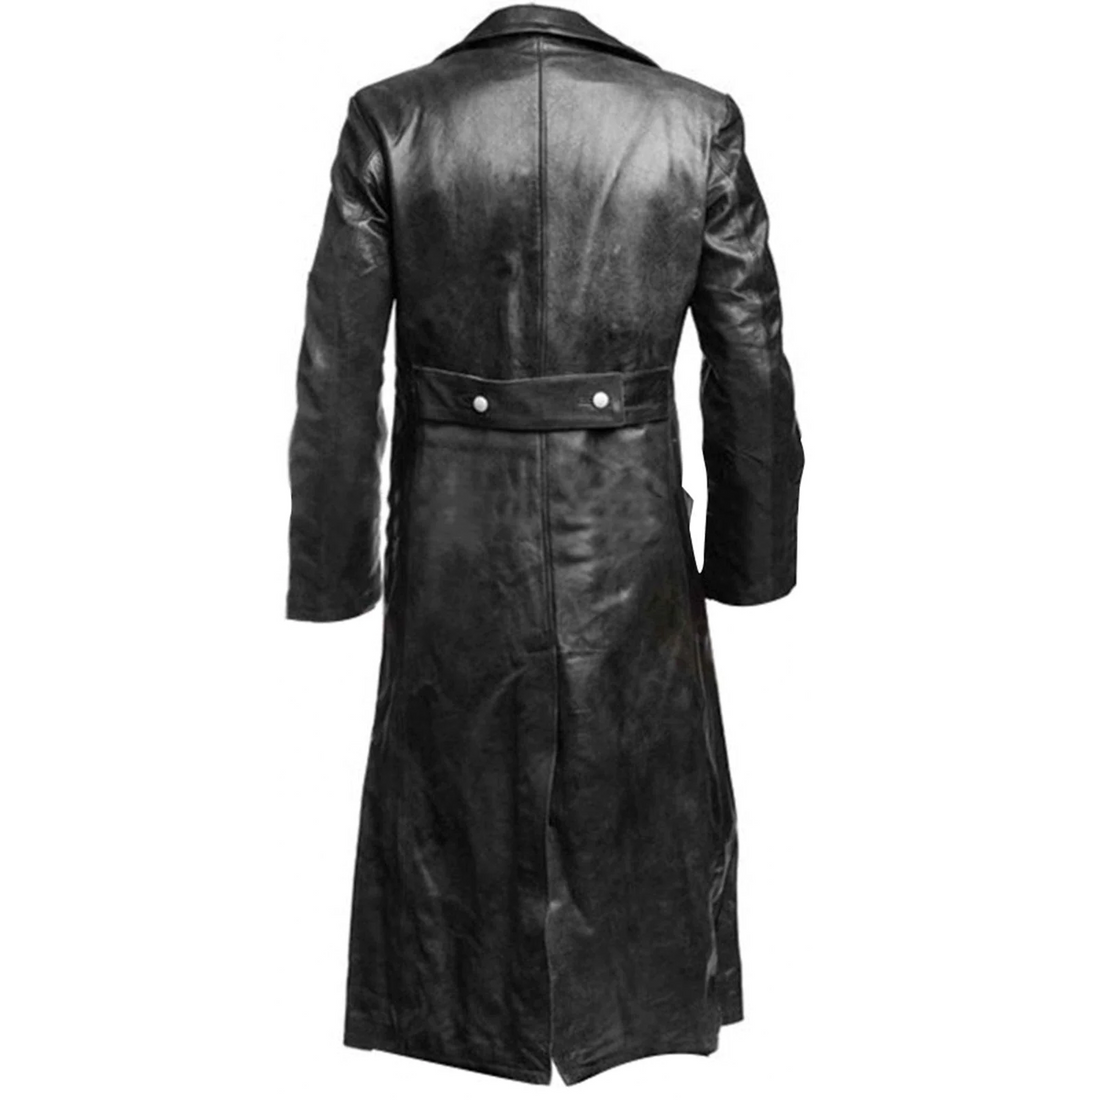 Men's Classic German Military Officer Black Leather Trench Coat - Luxurena Leather